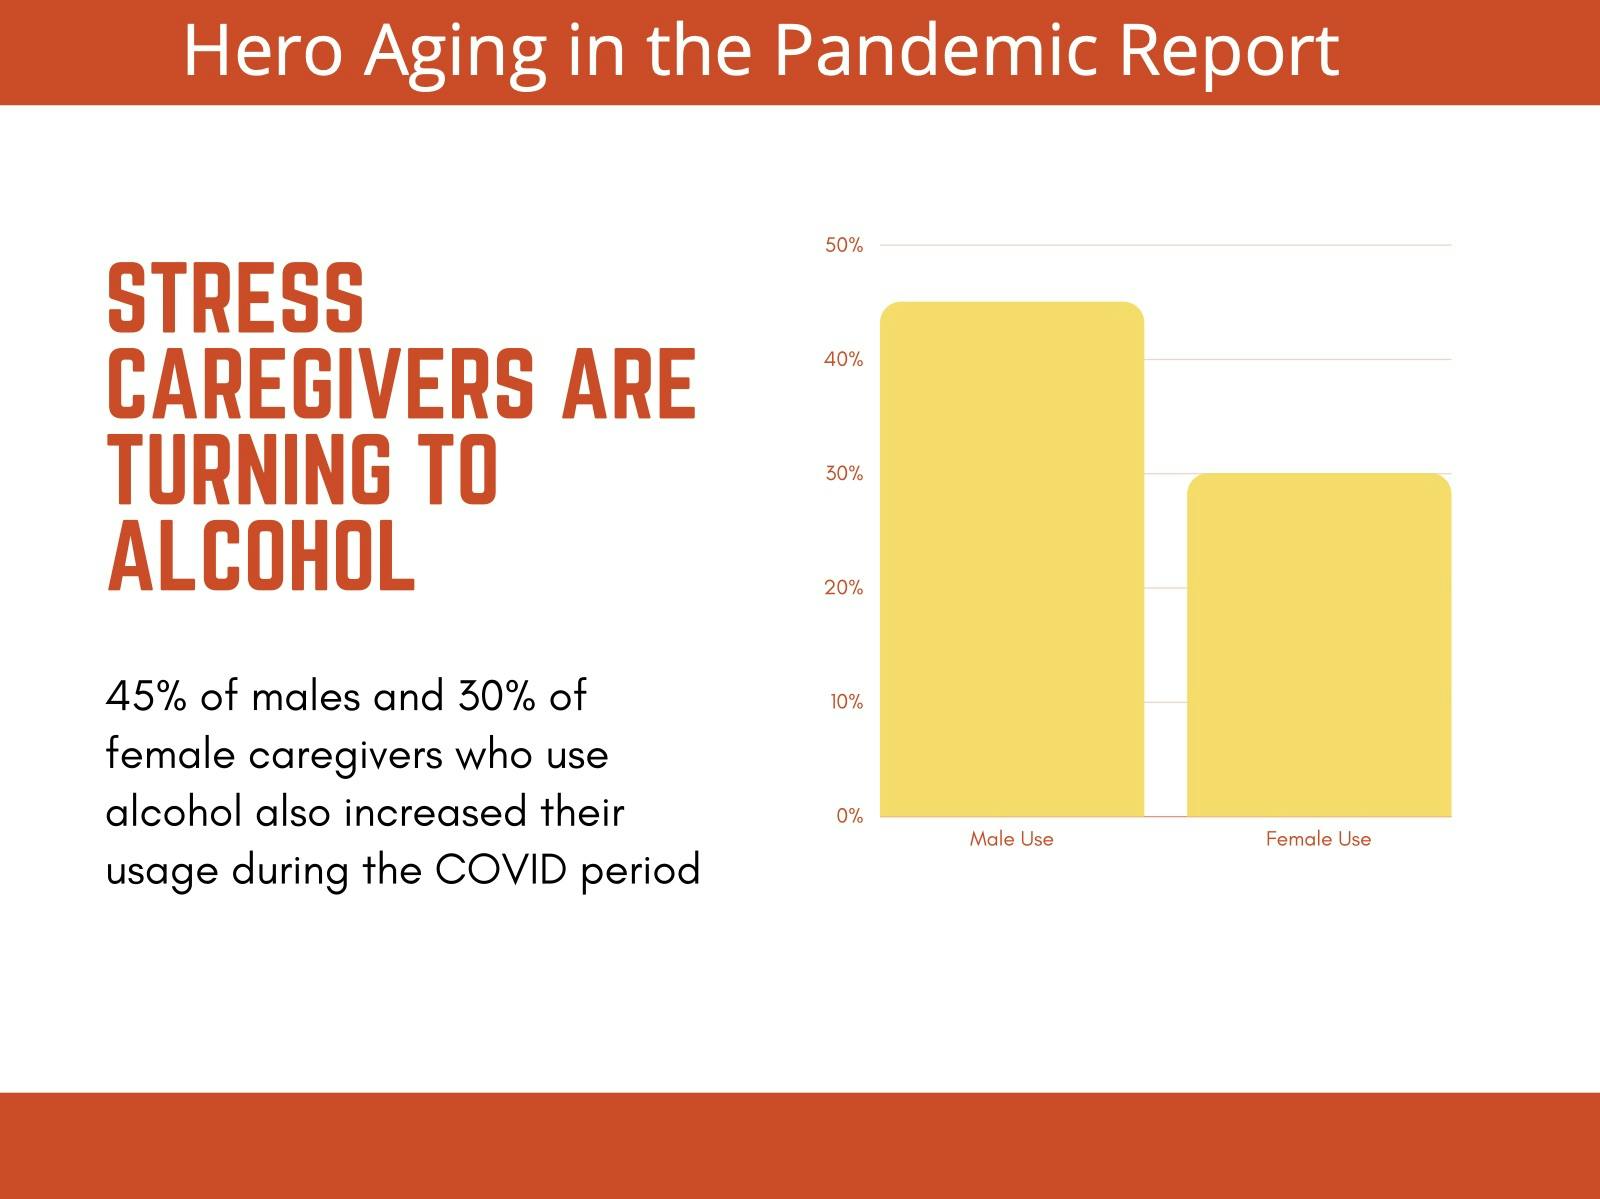 A bar graph showing that 45% of males and 30% of female caregivers who use alcohol also increased their usage during the COVID-19 pandemic. 